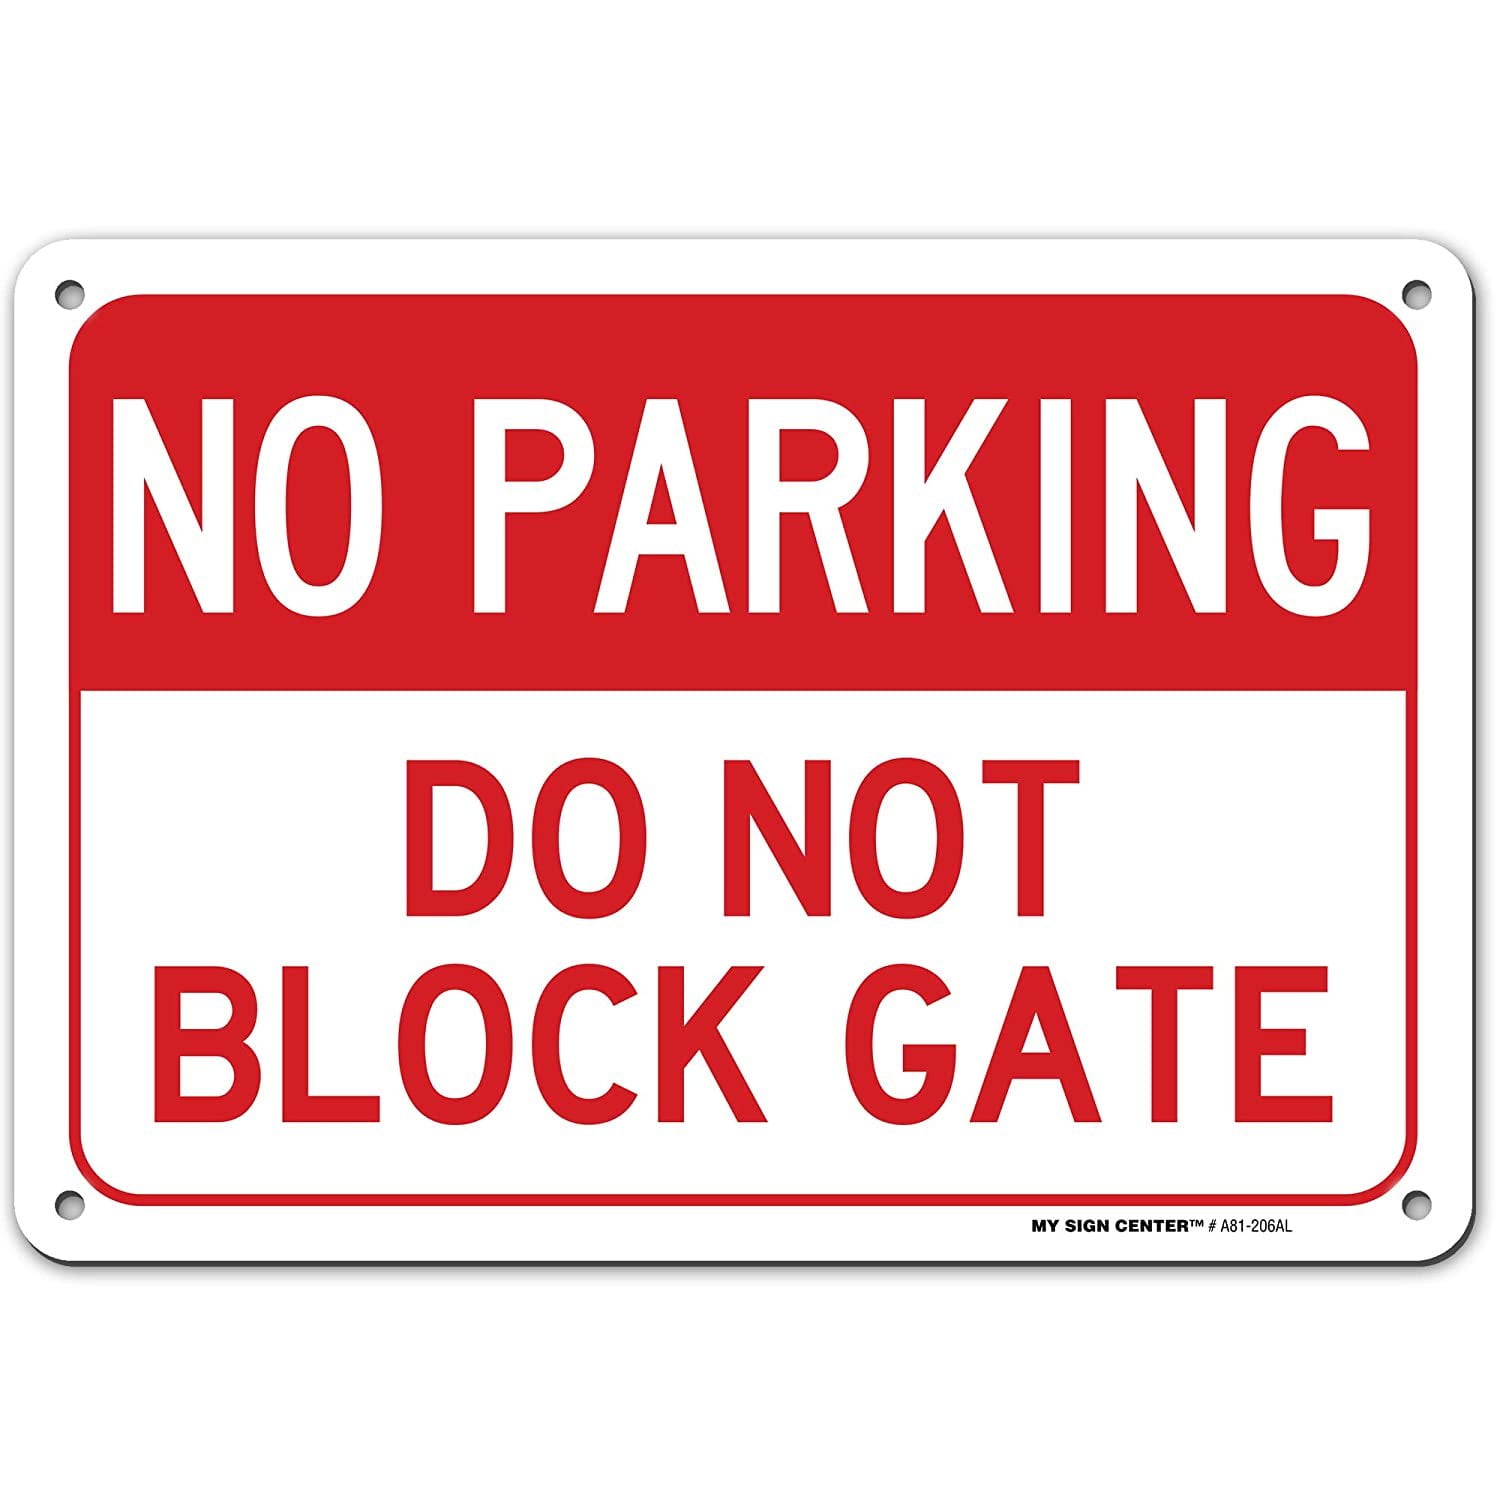 PARKING SIGN Metal Please Do Not Obstruct Drive Driveway Reserved Weatherproof 